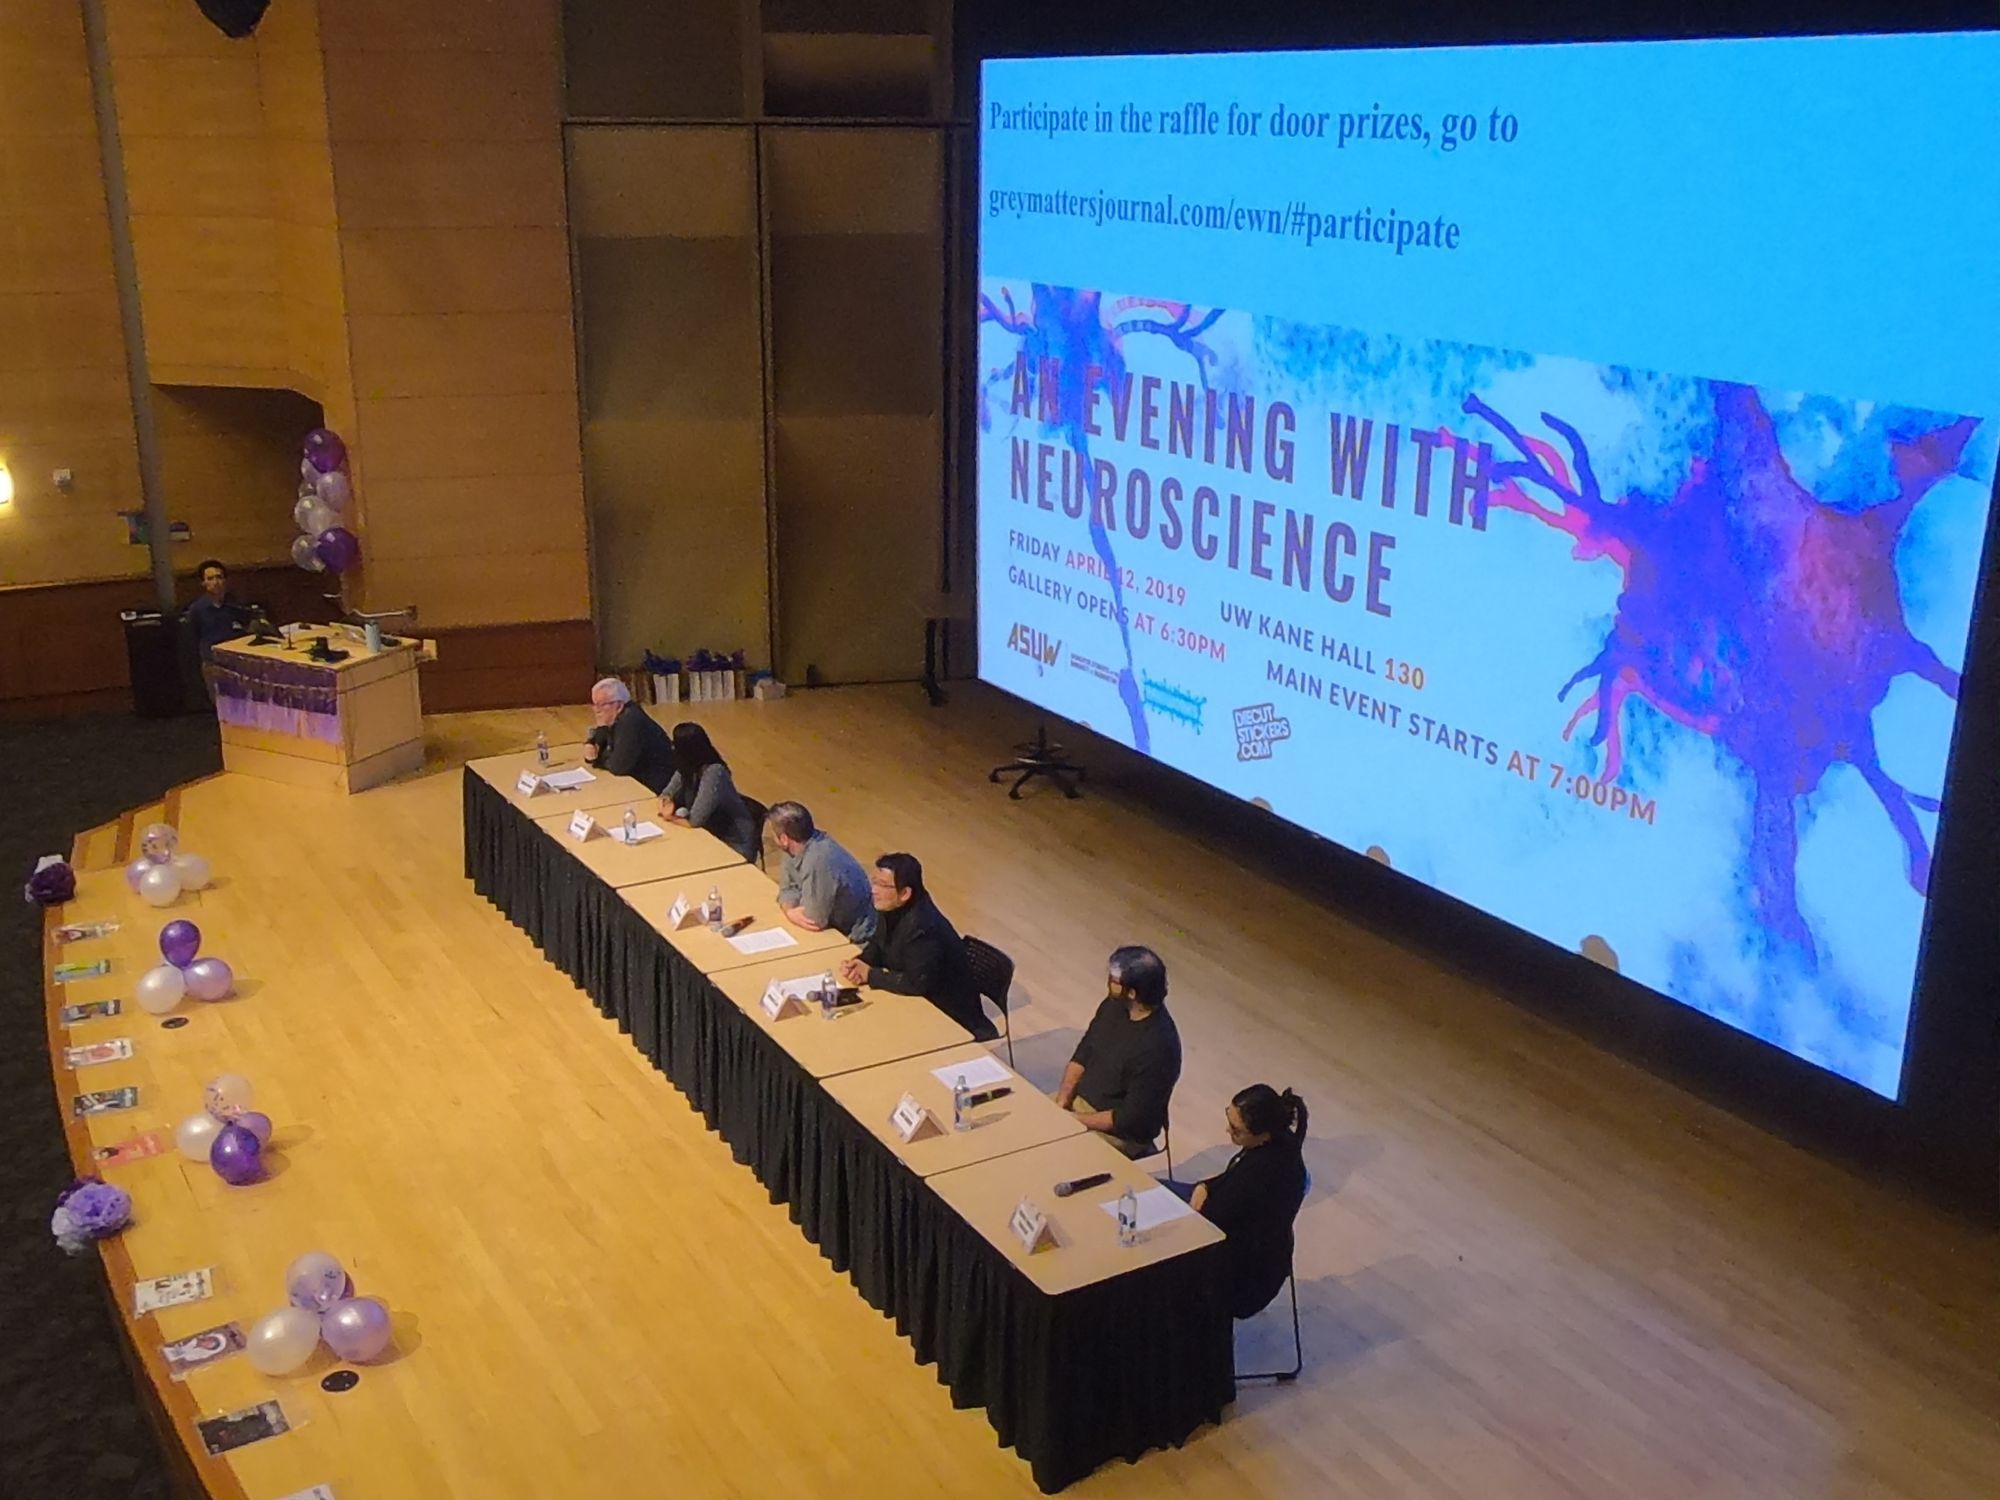 The top left image features the EWN panelists on the light brown wooden stage of the Kane Hall auditorium at the University of Washington, decorated with purple and white balloons and streamers, with a title slide in the background displaying 'An Evening with Neuroscience' and purple and blue neurons.